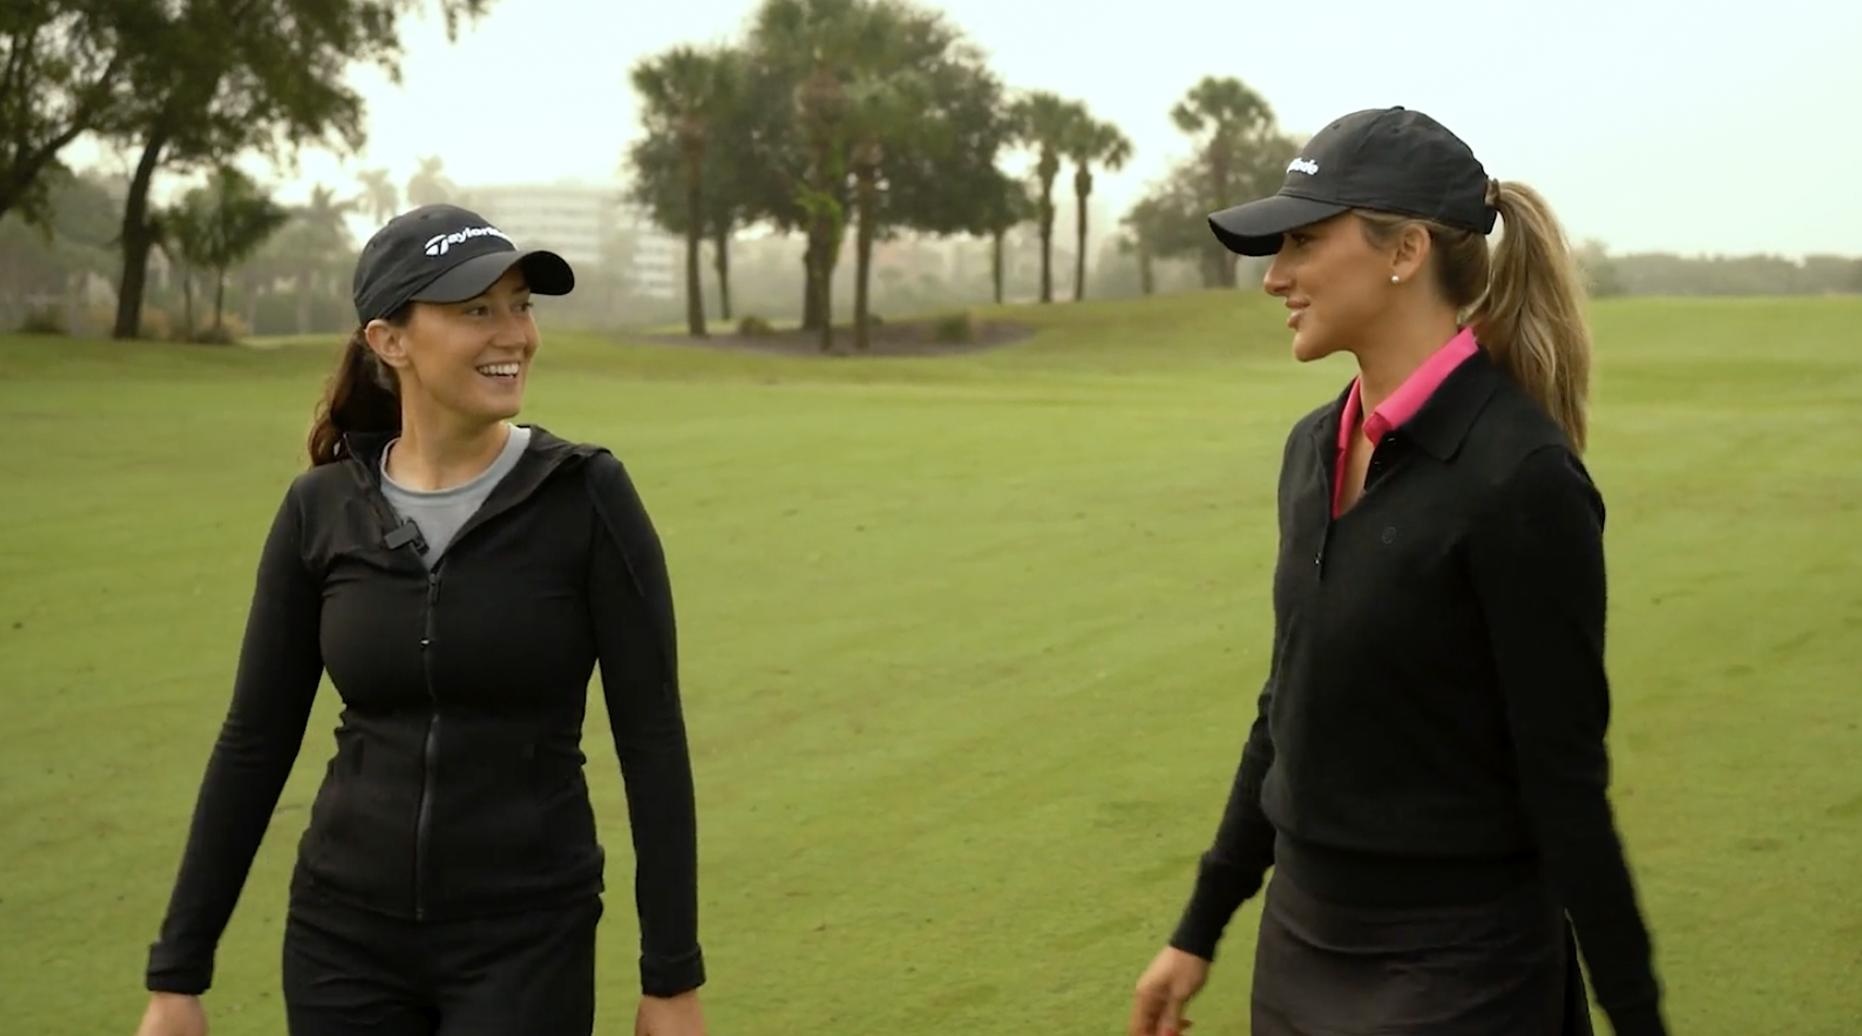 How the Kalea Premier line is upgrading women’s golf clubs for good